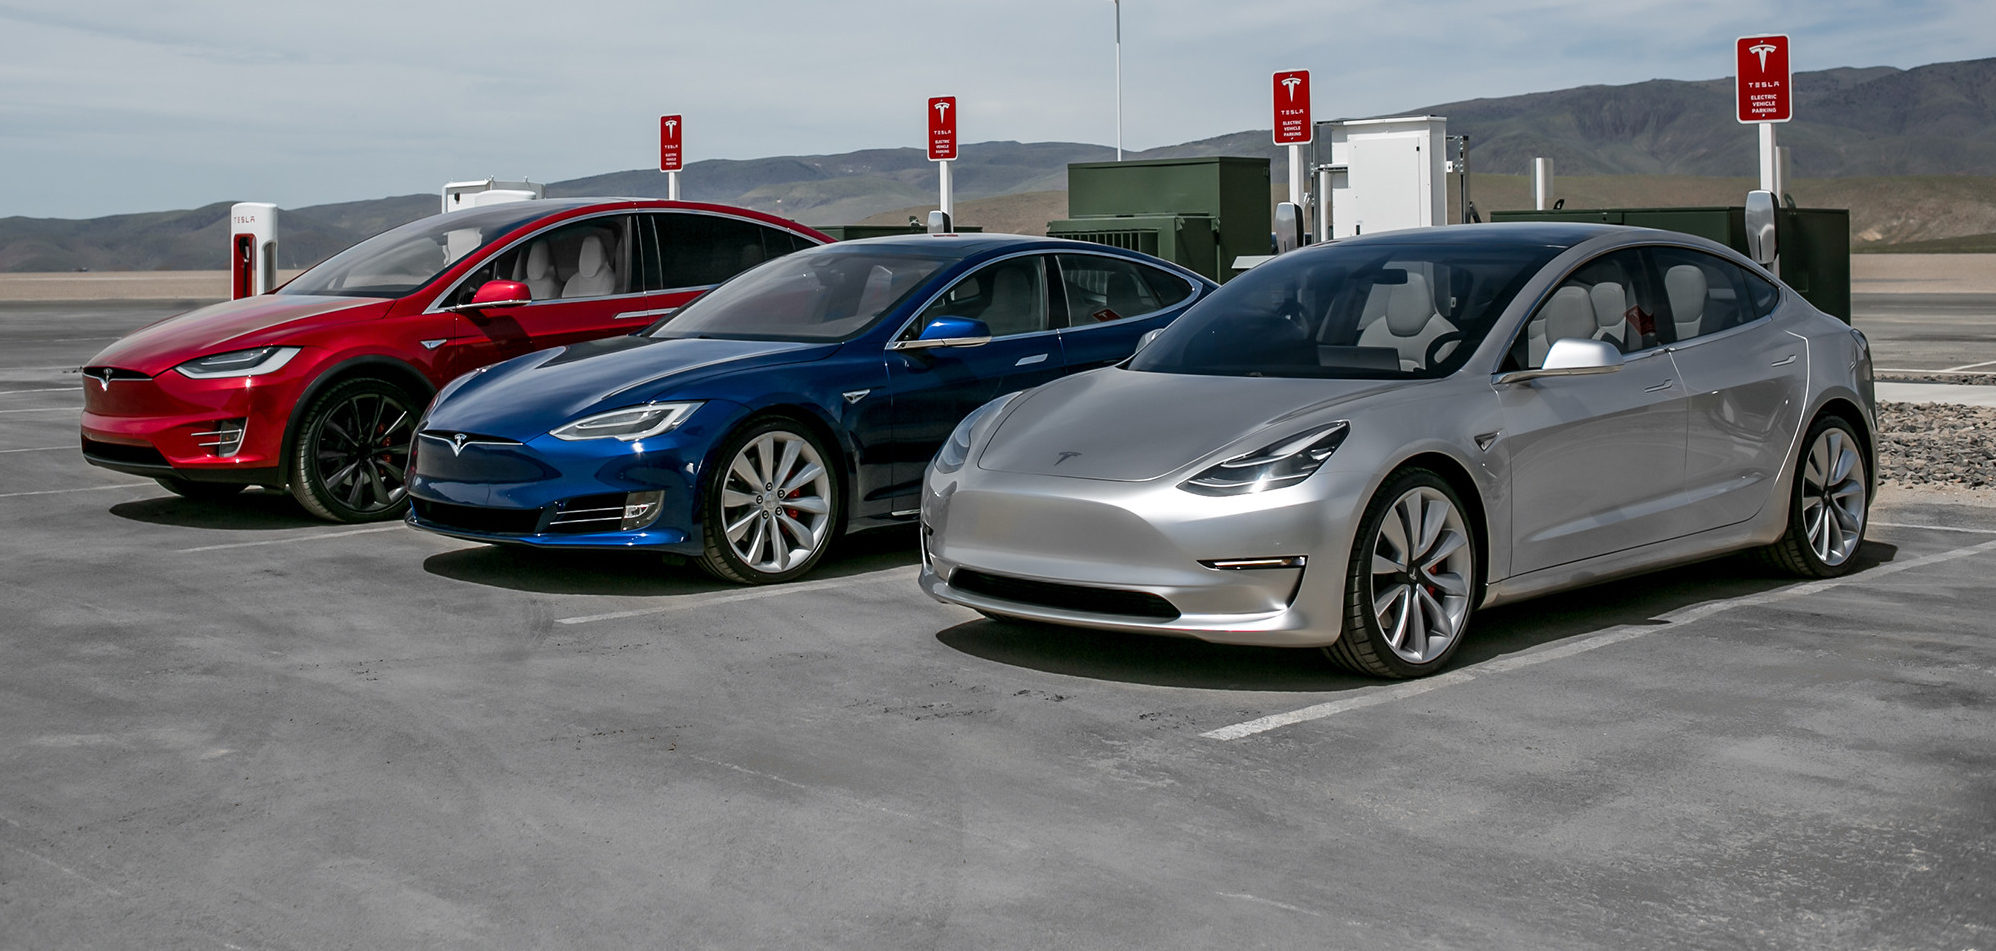 Tesla could be sitting on a $1.2 trillion vehicle software market by 2030